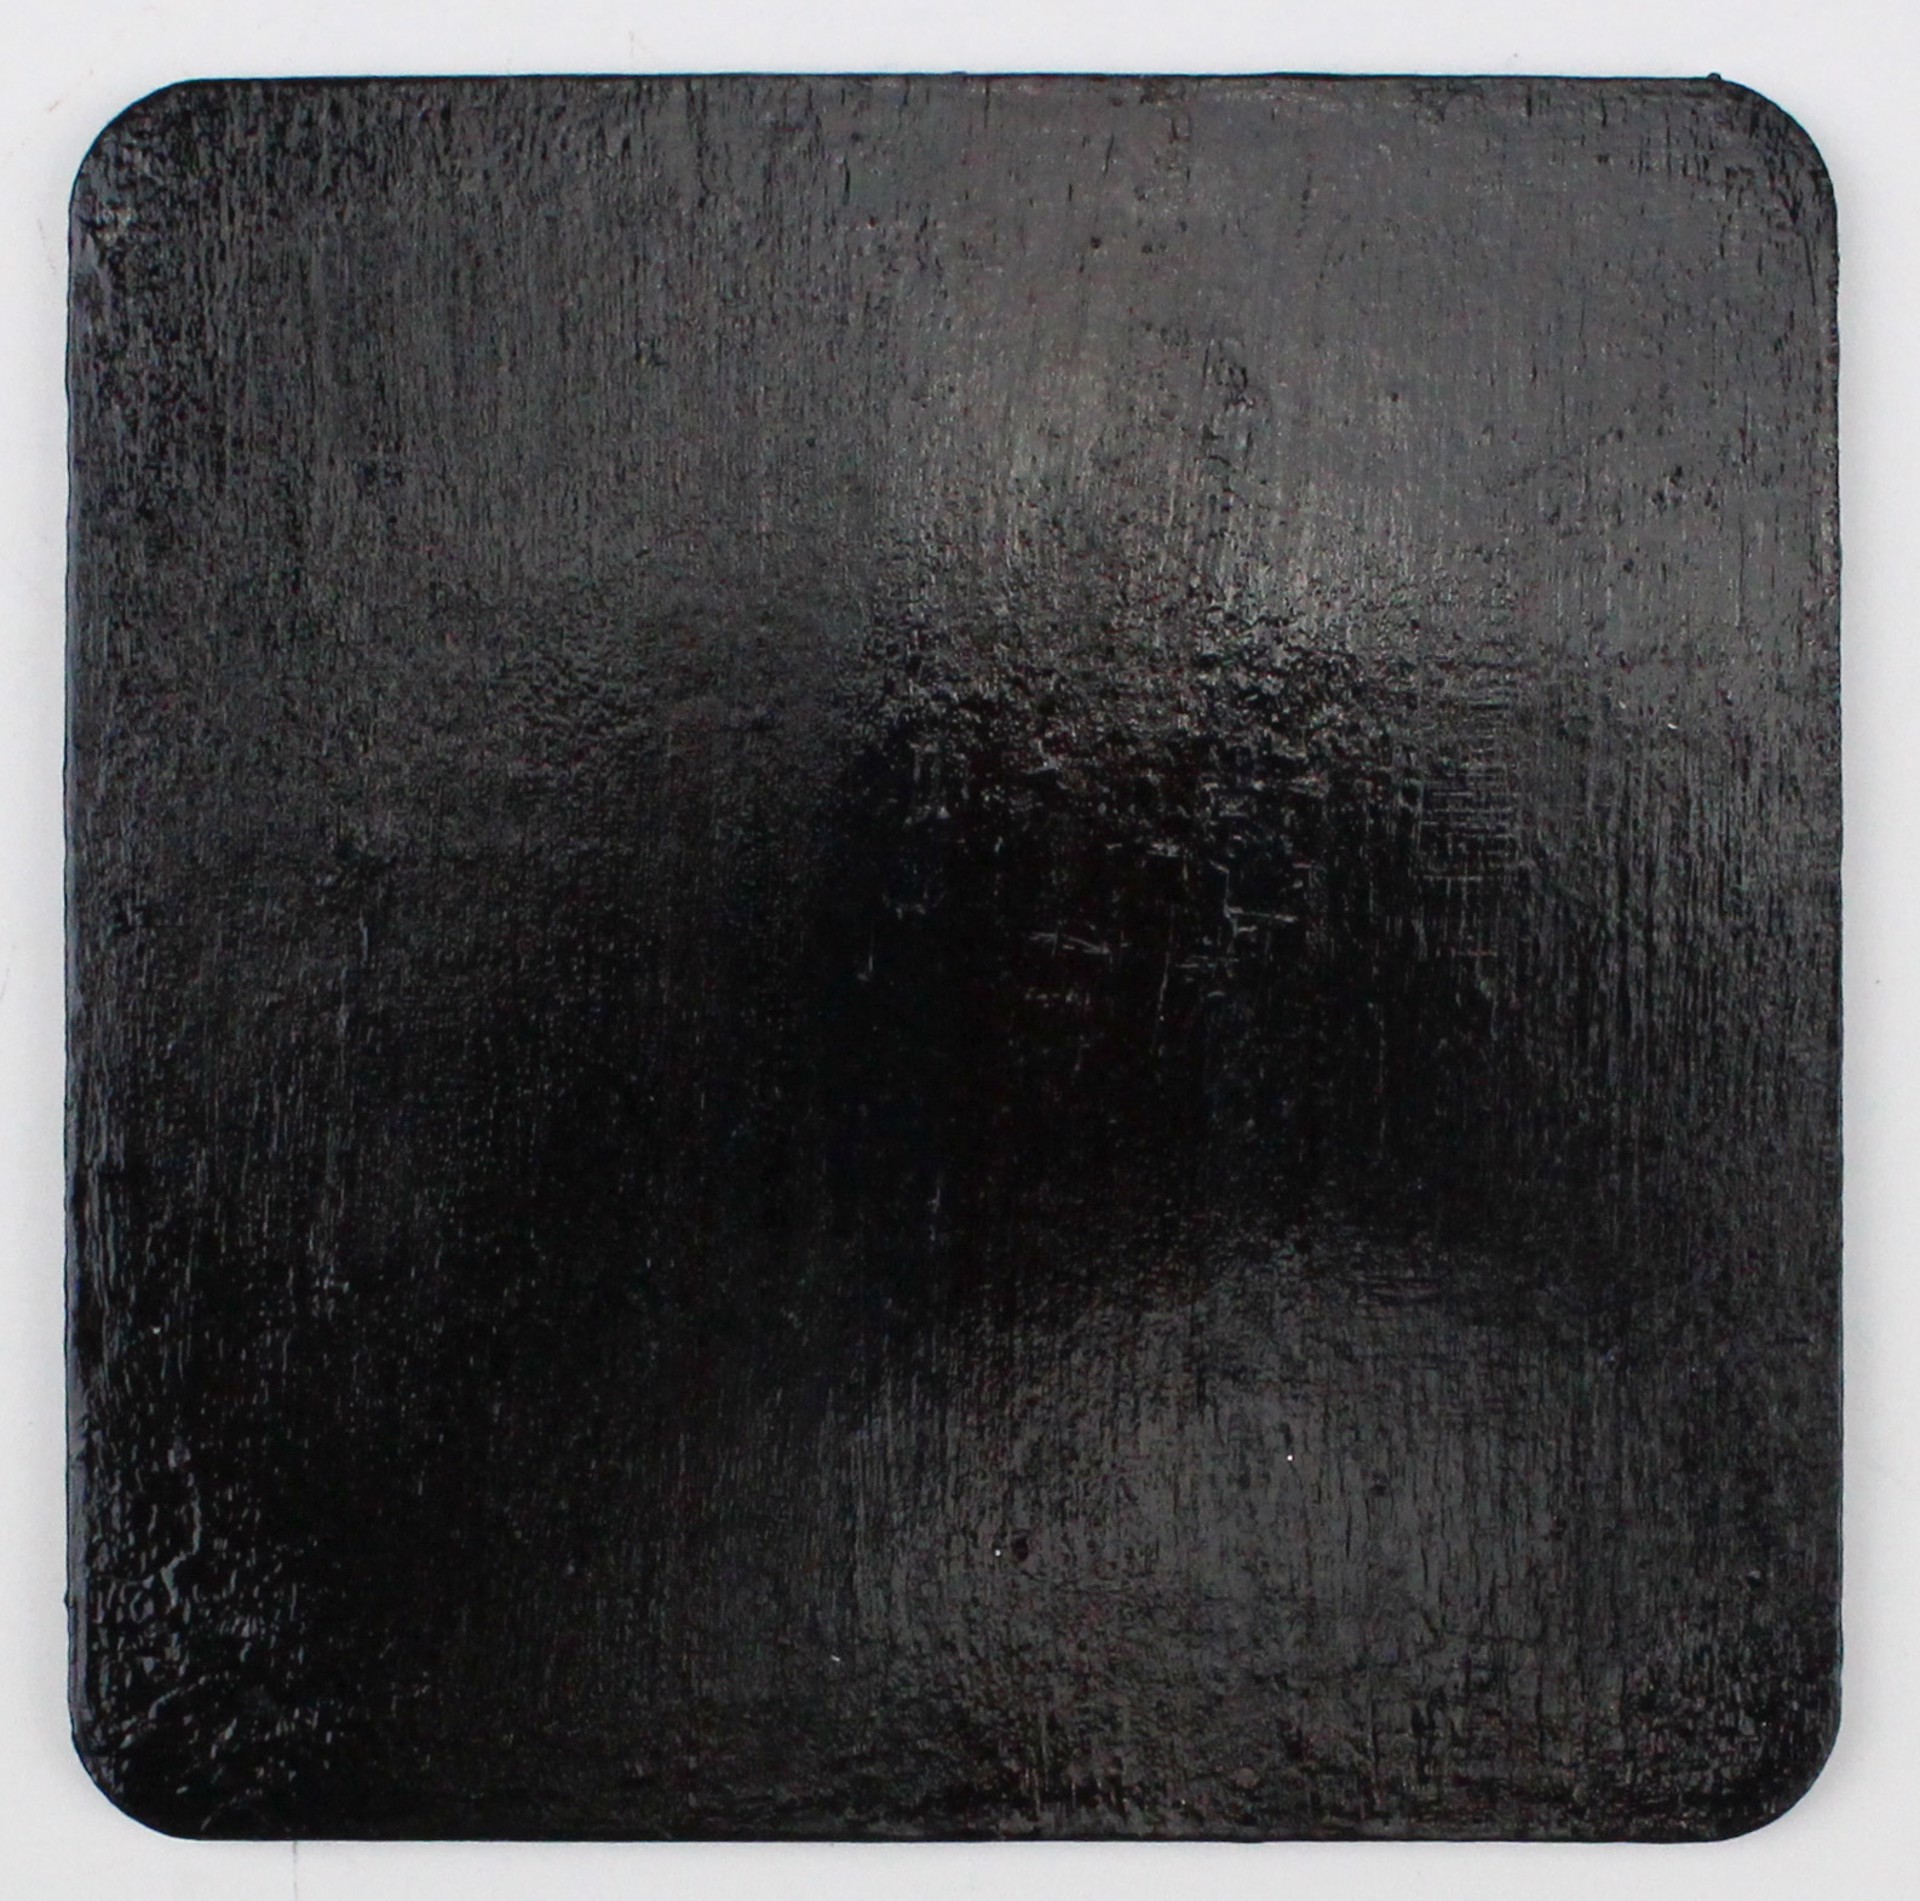 Graphic Painting Coaster (1) by Keith Lewis